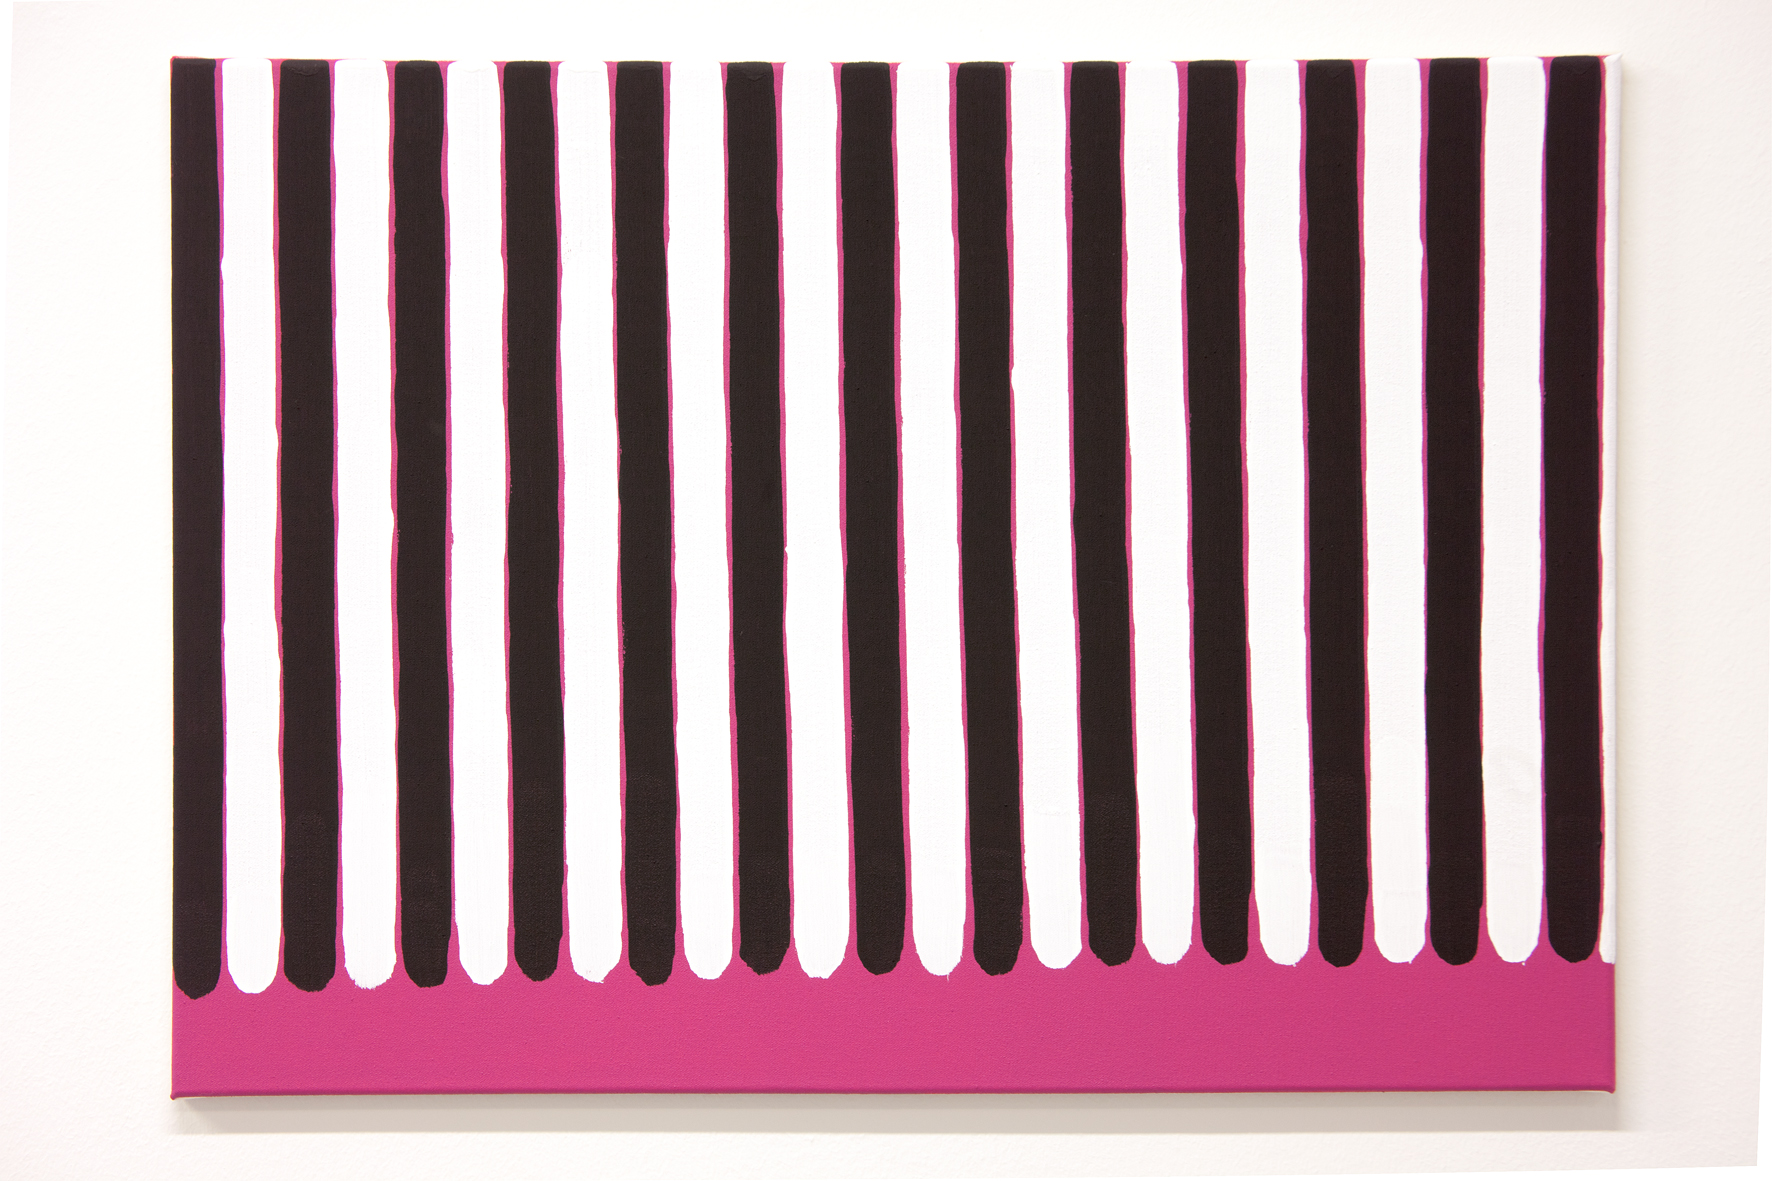 Holger Endres, 01 Magenta Schwarz Weiss (Tag 4), 2012, acrylic on cotton, 50 x 70 cm